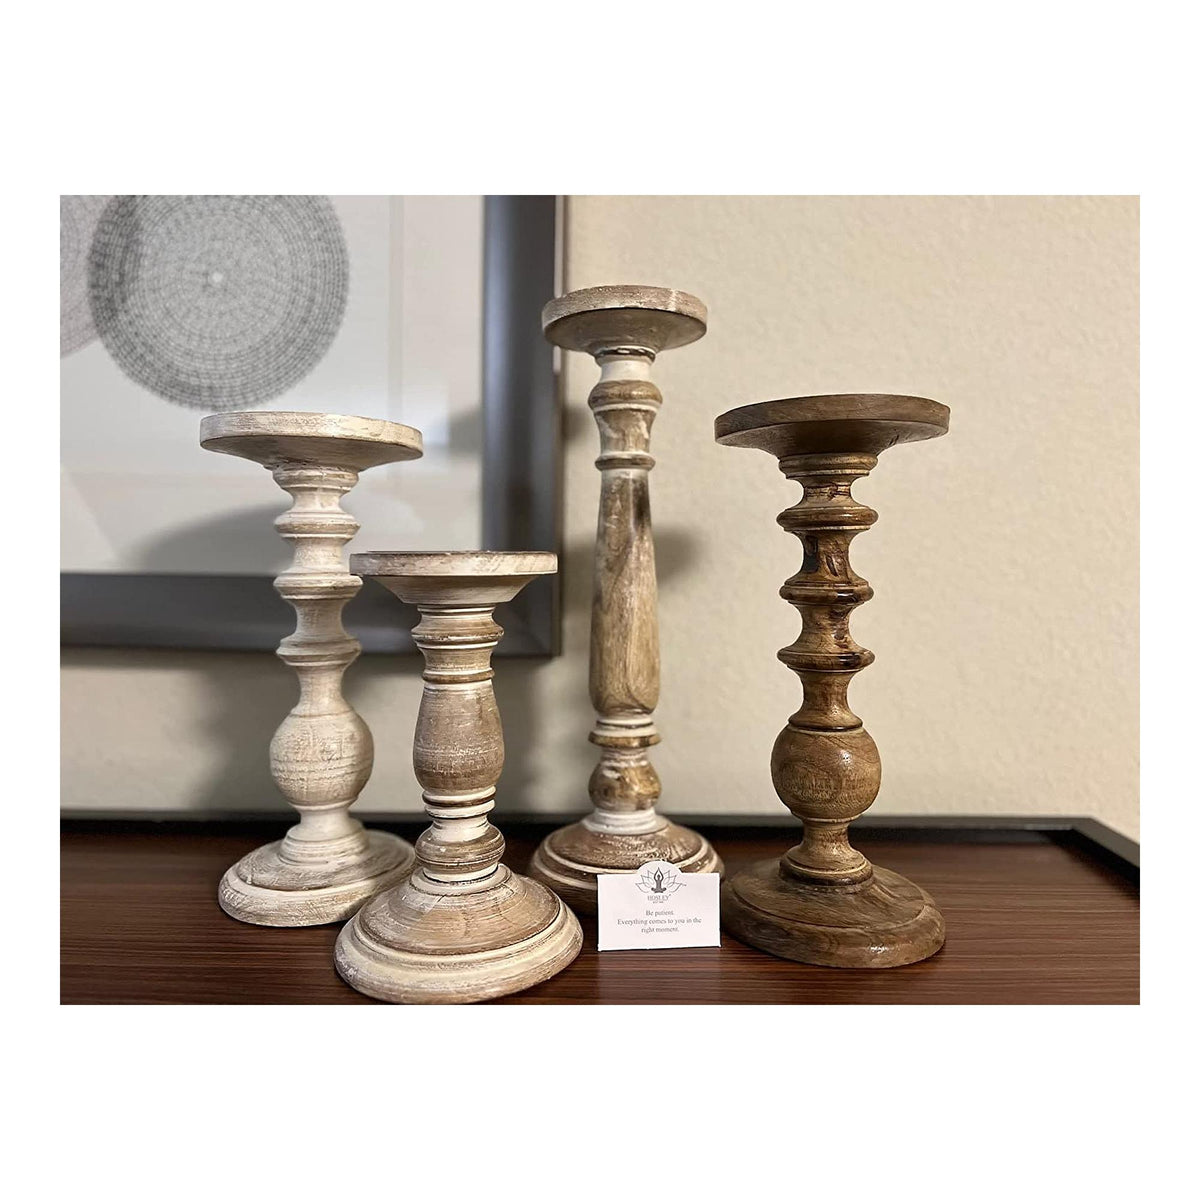 HOSLEY®  Wood Pillar Candle Holder, White Color, Set of 4, 11 inches  High each